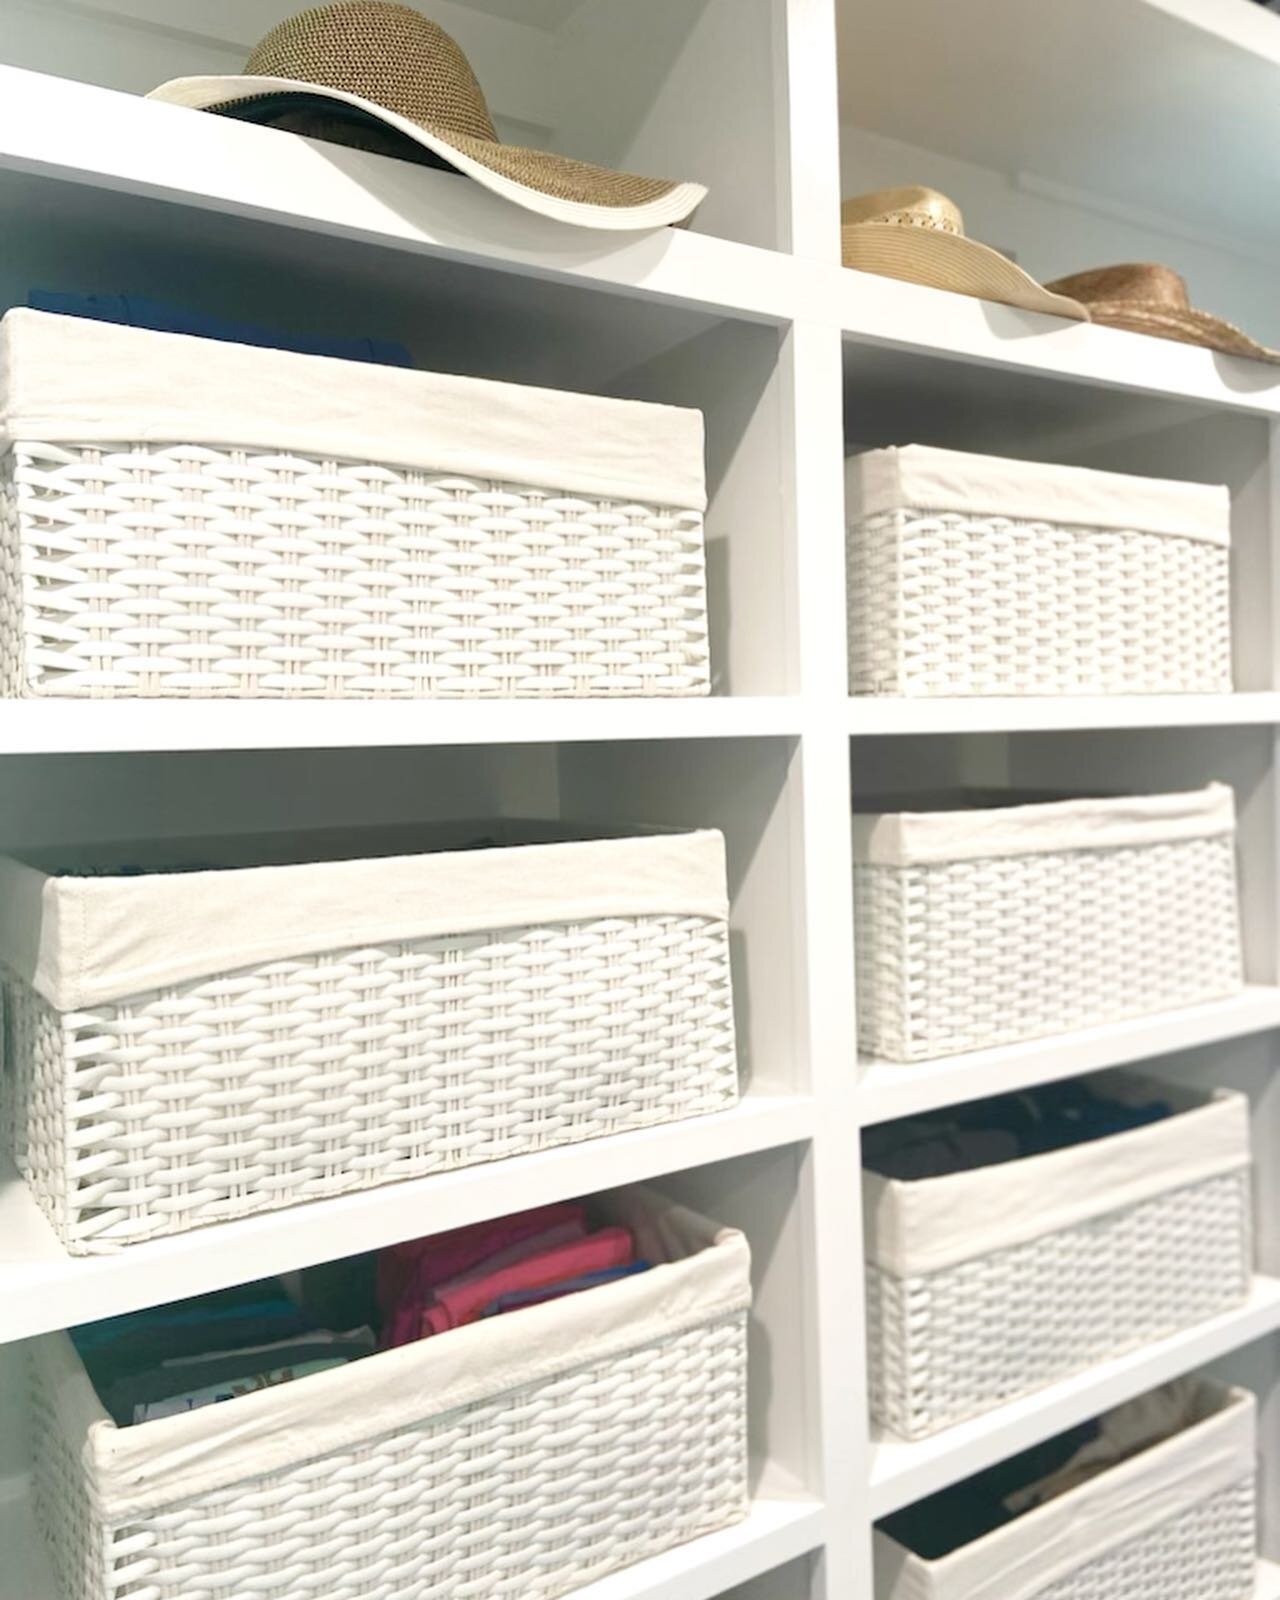 It&rsquo;s amazing the difference some baskets make! We love clear bins but using opaque containers minimizes visual clutter and can add a peace to your spaces ⭐️